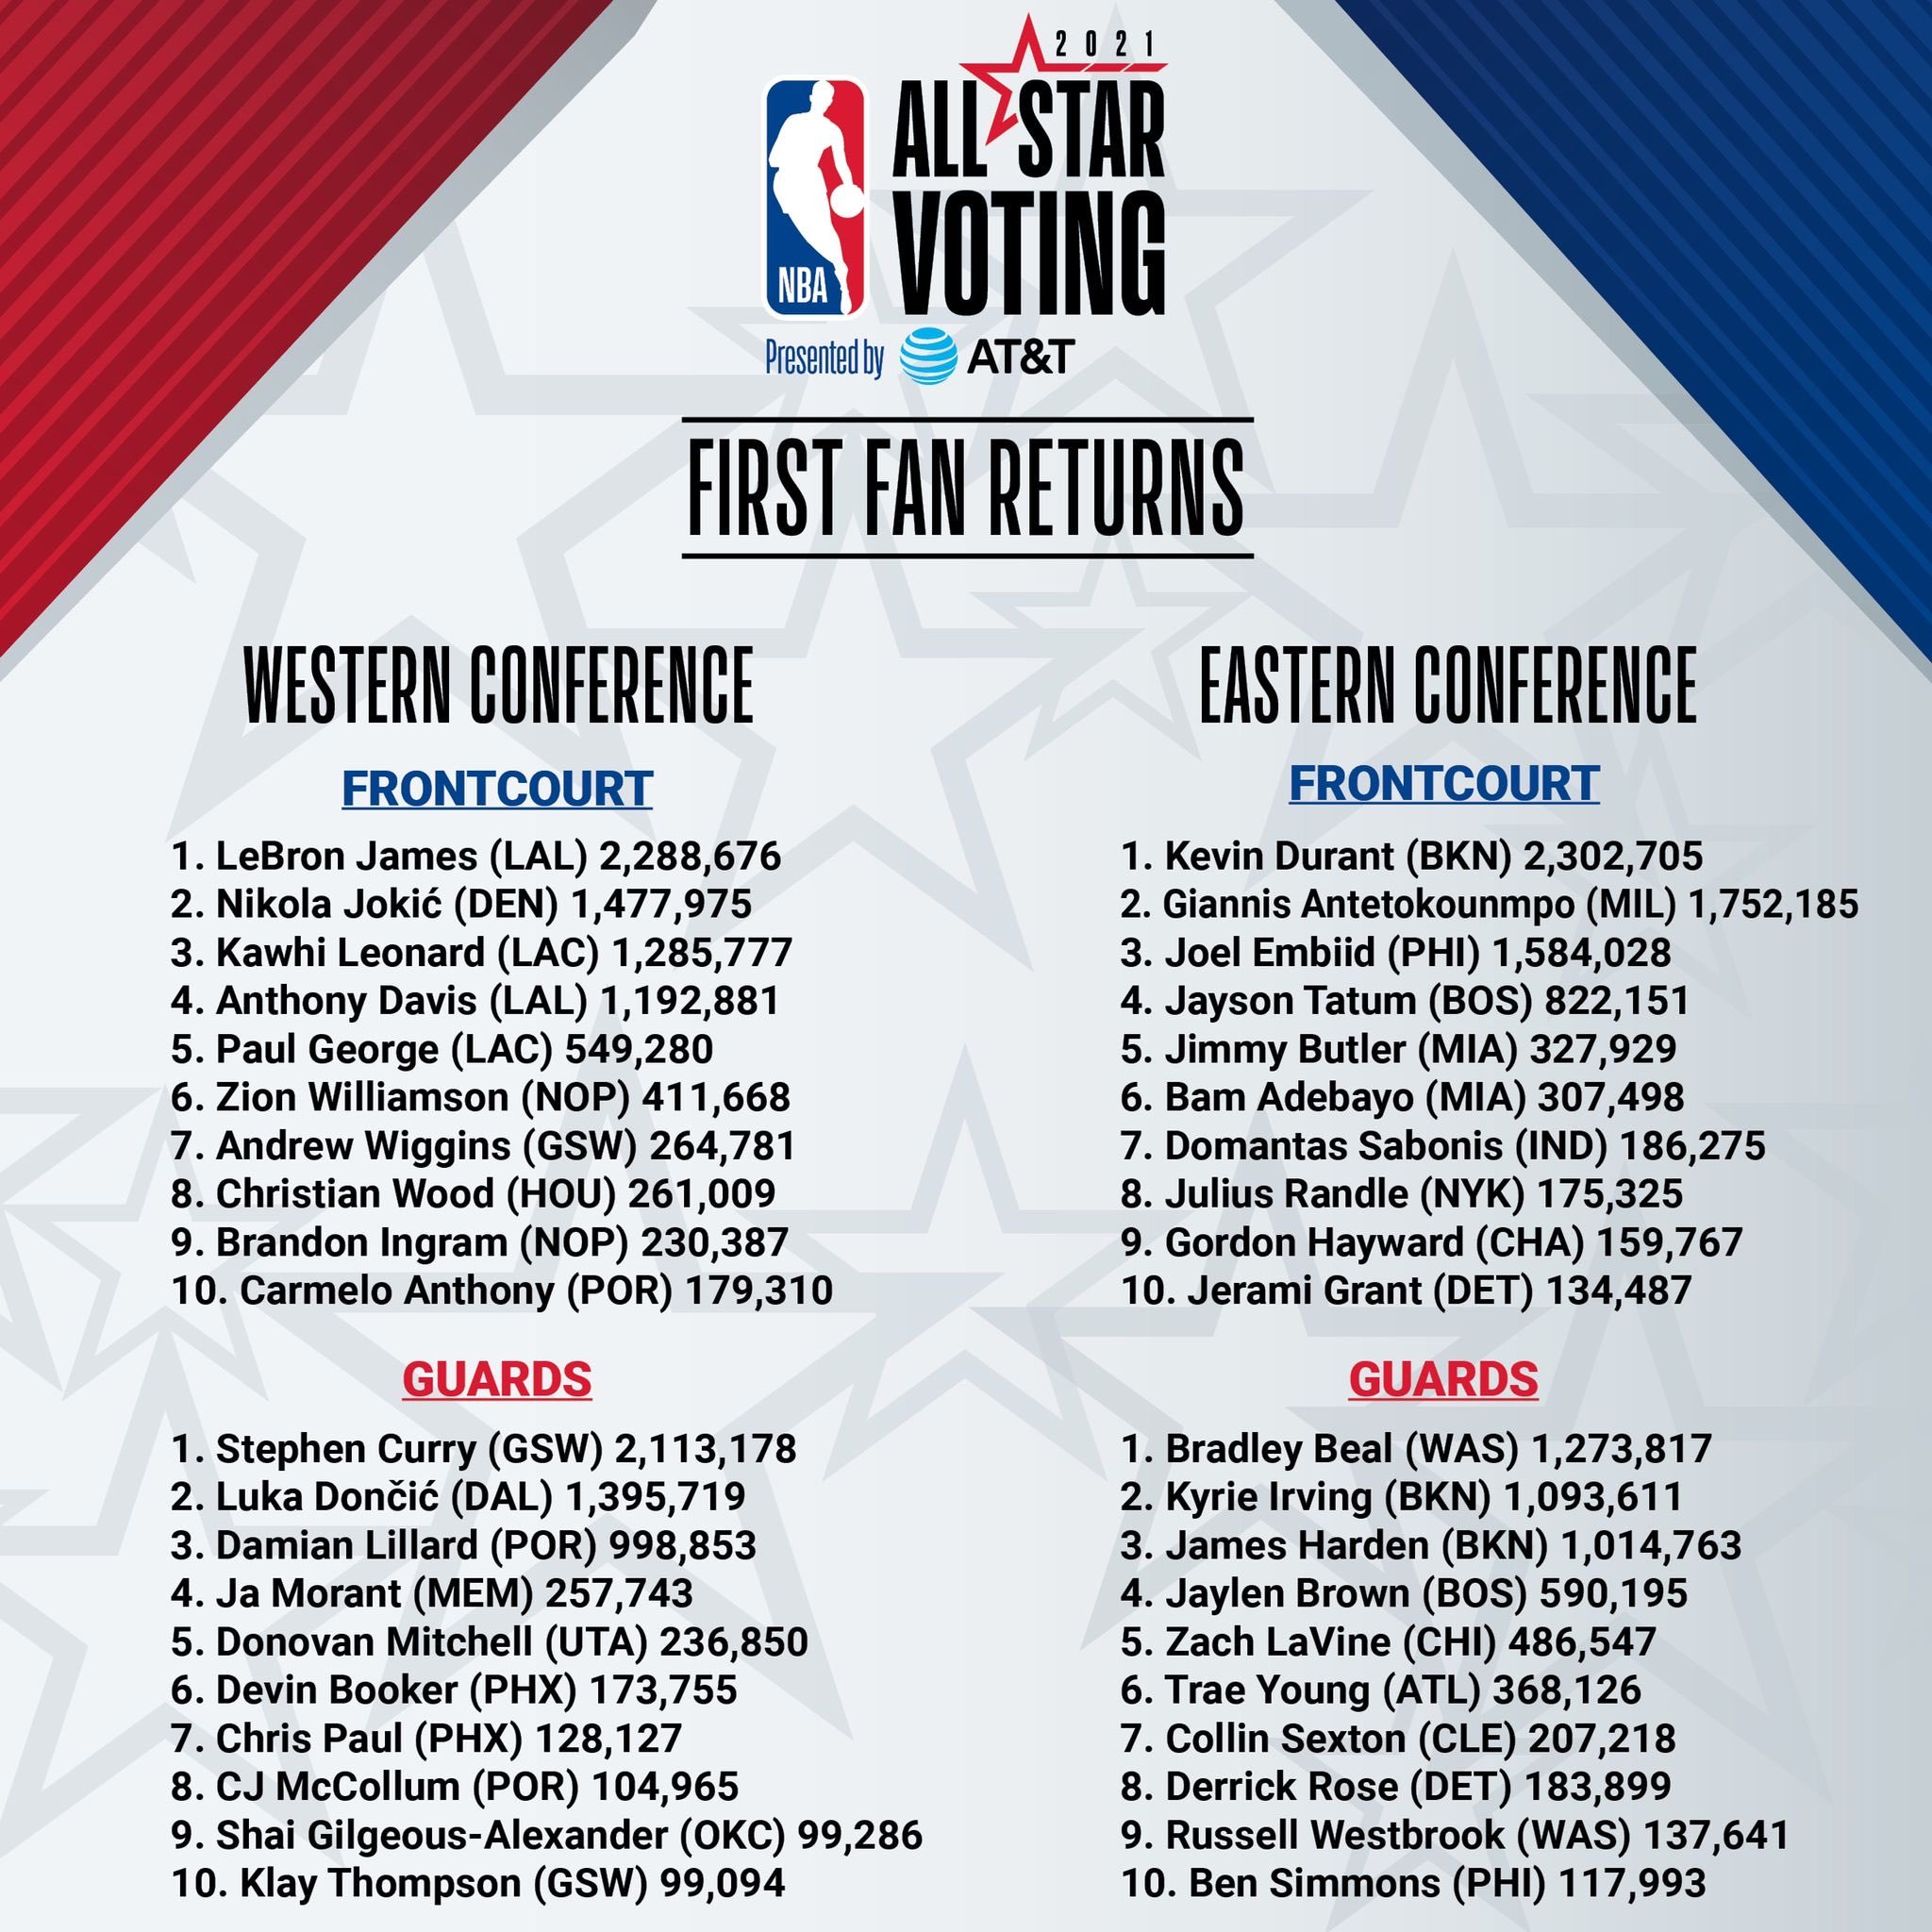 Curry looking like an NBA All-Star again after 1st round of fan voting